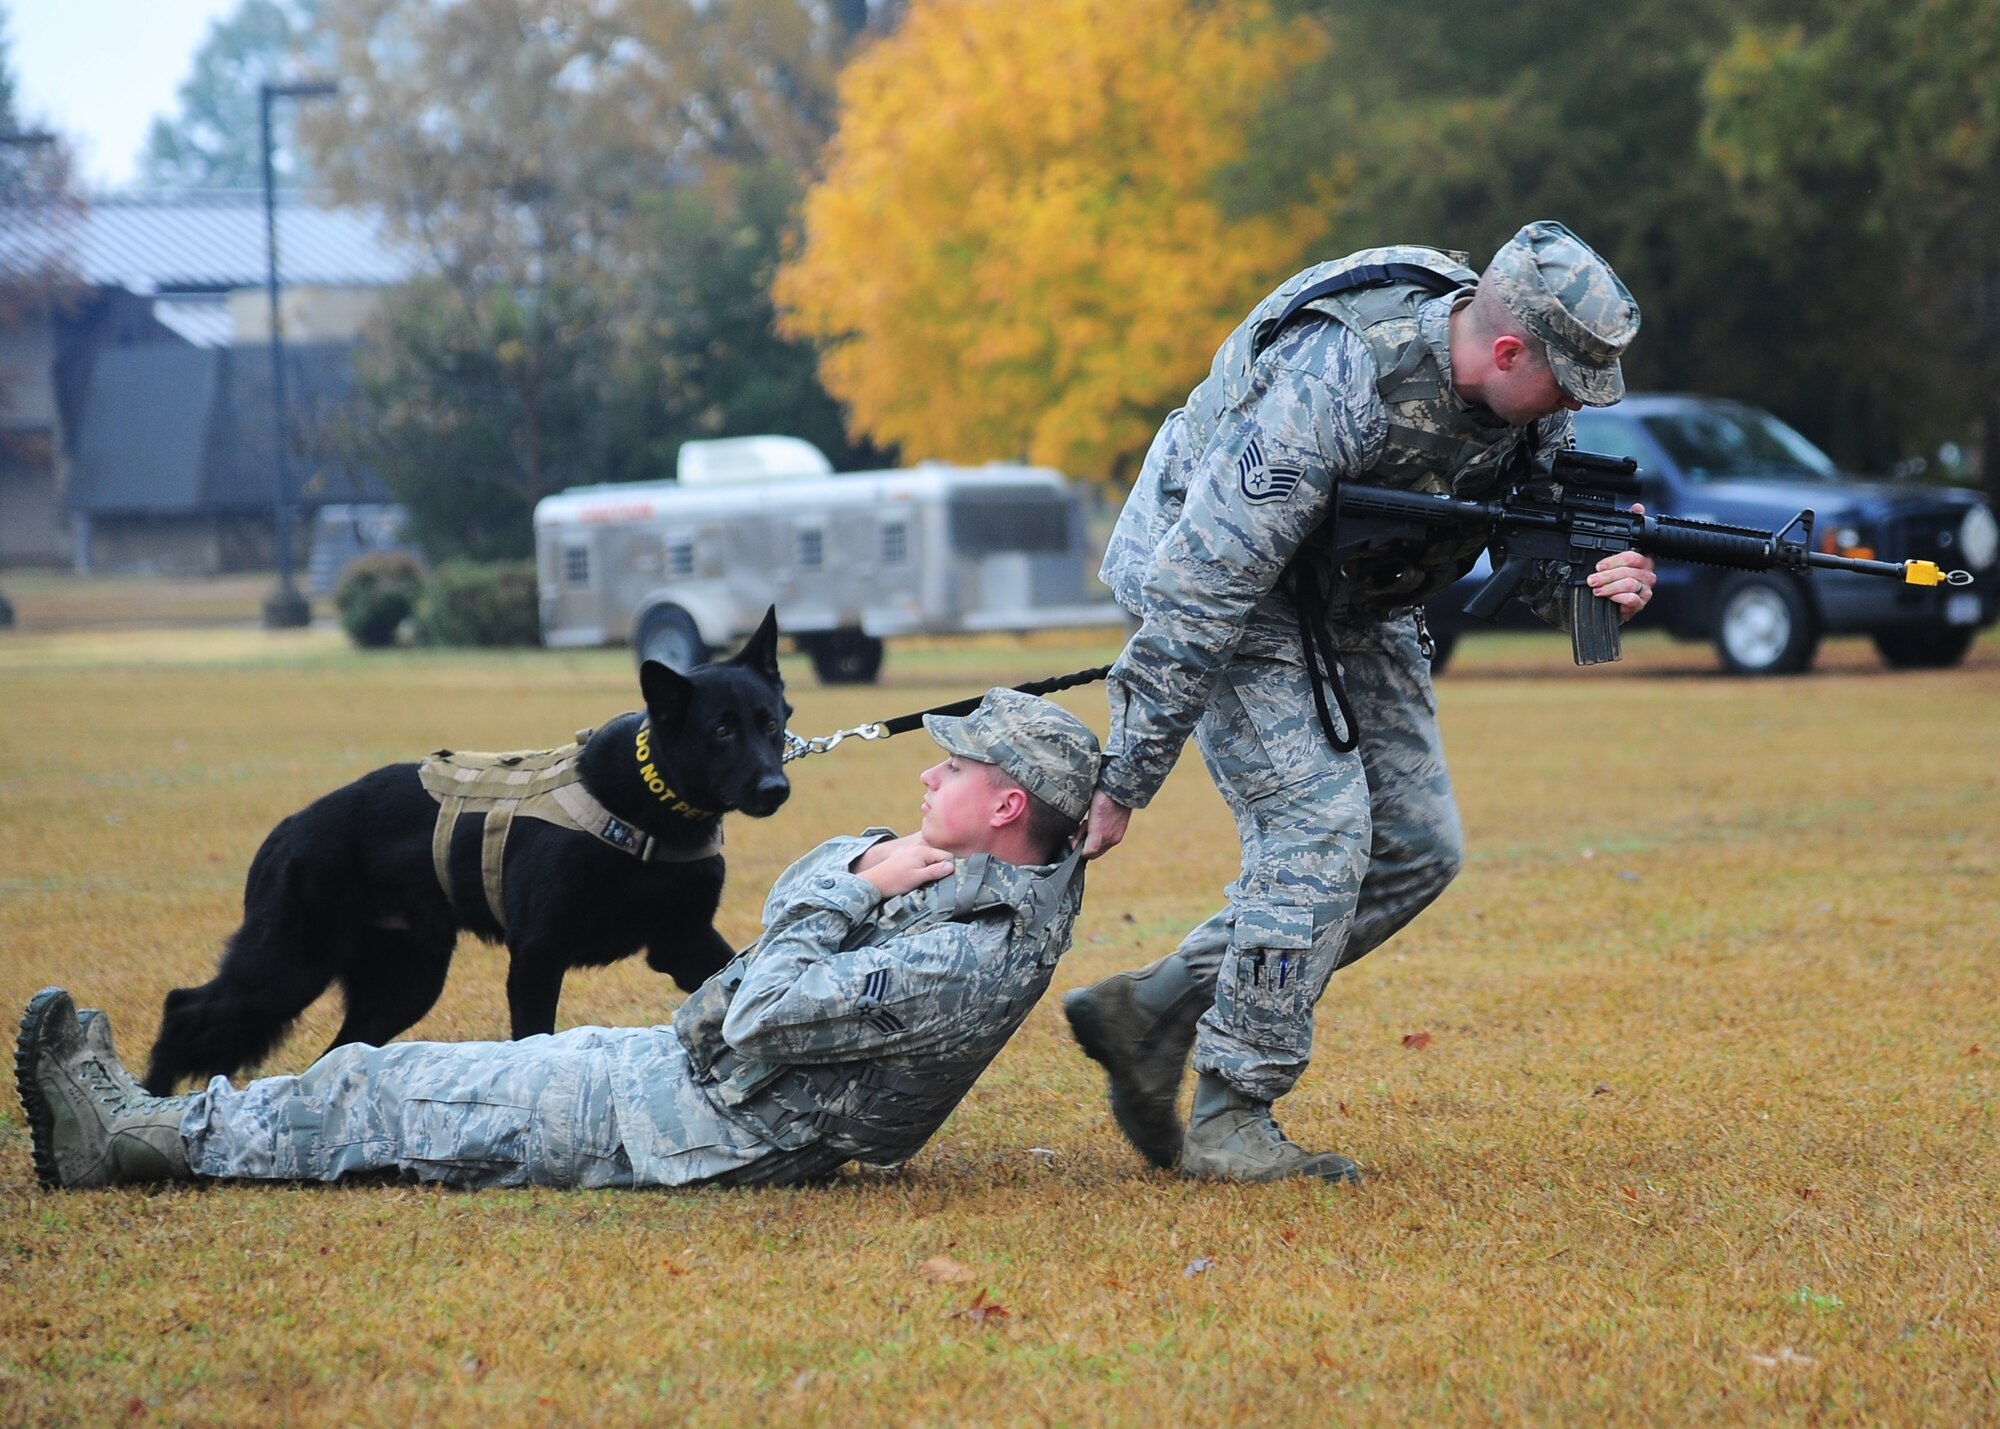 Staff Sgt.  Karl Stefanowicz, 14th Security Forces Squadron, drags an “injured” Airman while Maci, a military working dog, oversees the operation during the Military Working Dog Demonstration Nov. 22 outside of the Columbus Club. (U.S. Air Force Photo/Airman 1st Class Daniel Lile)